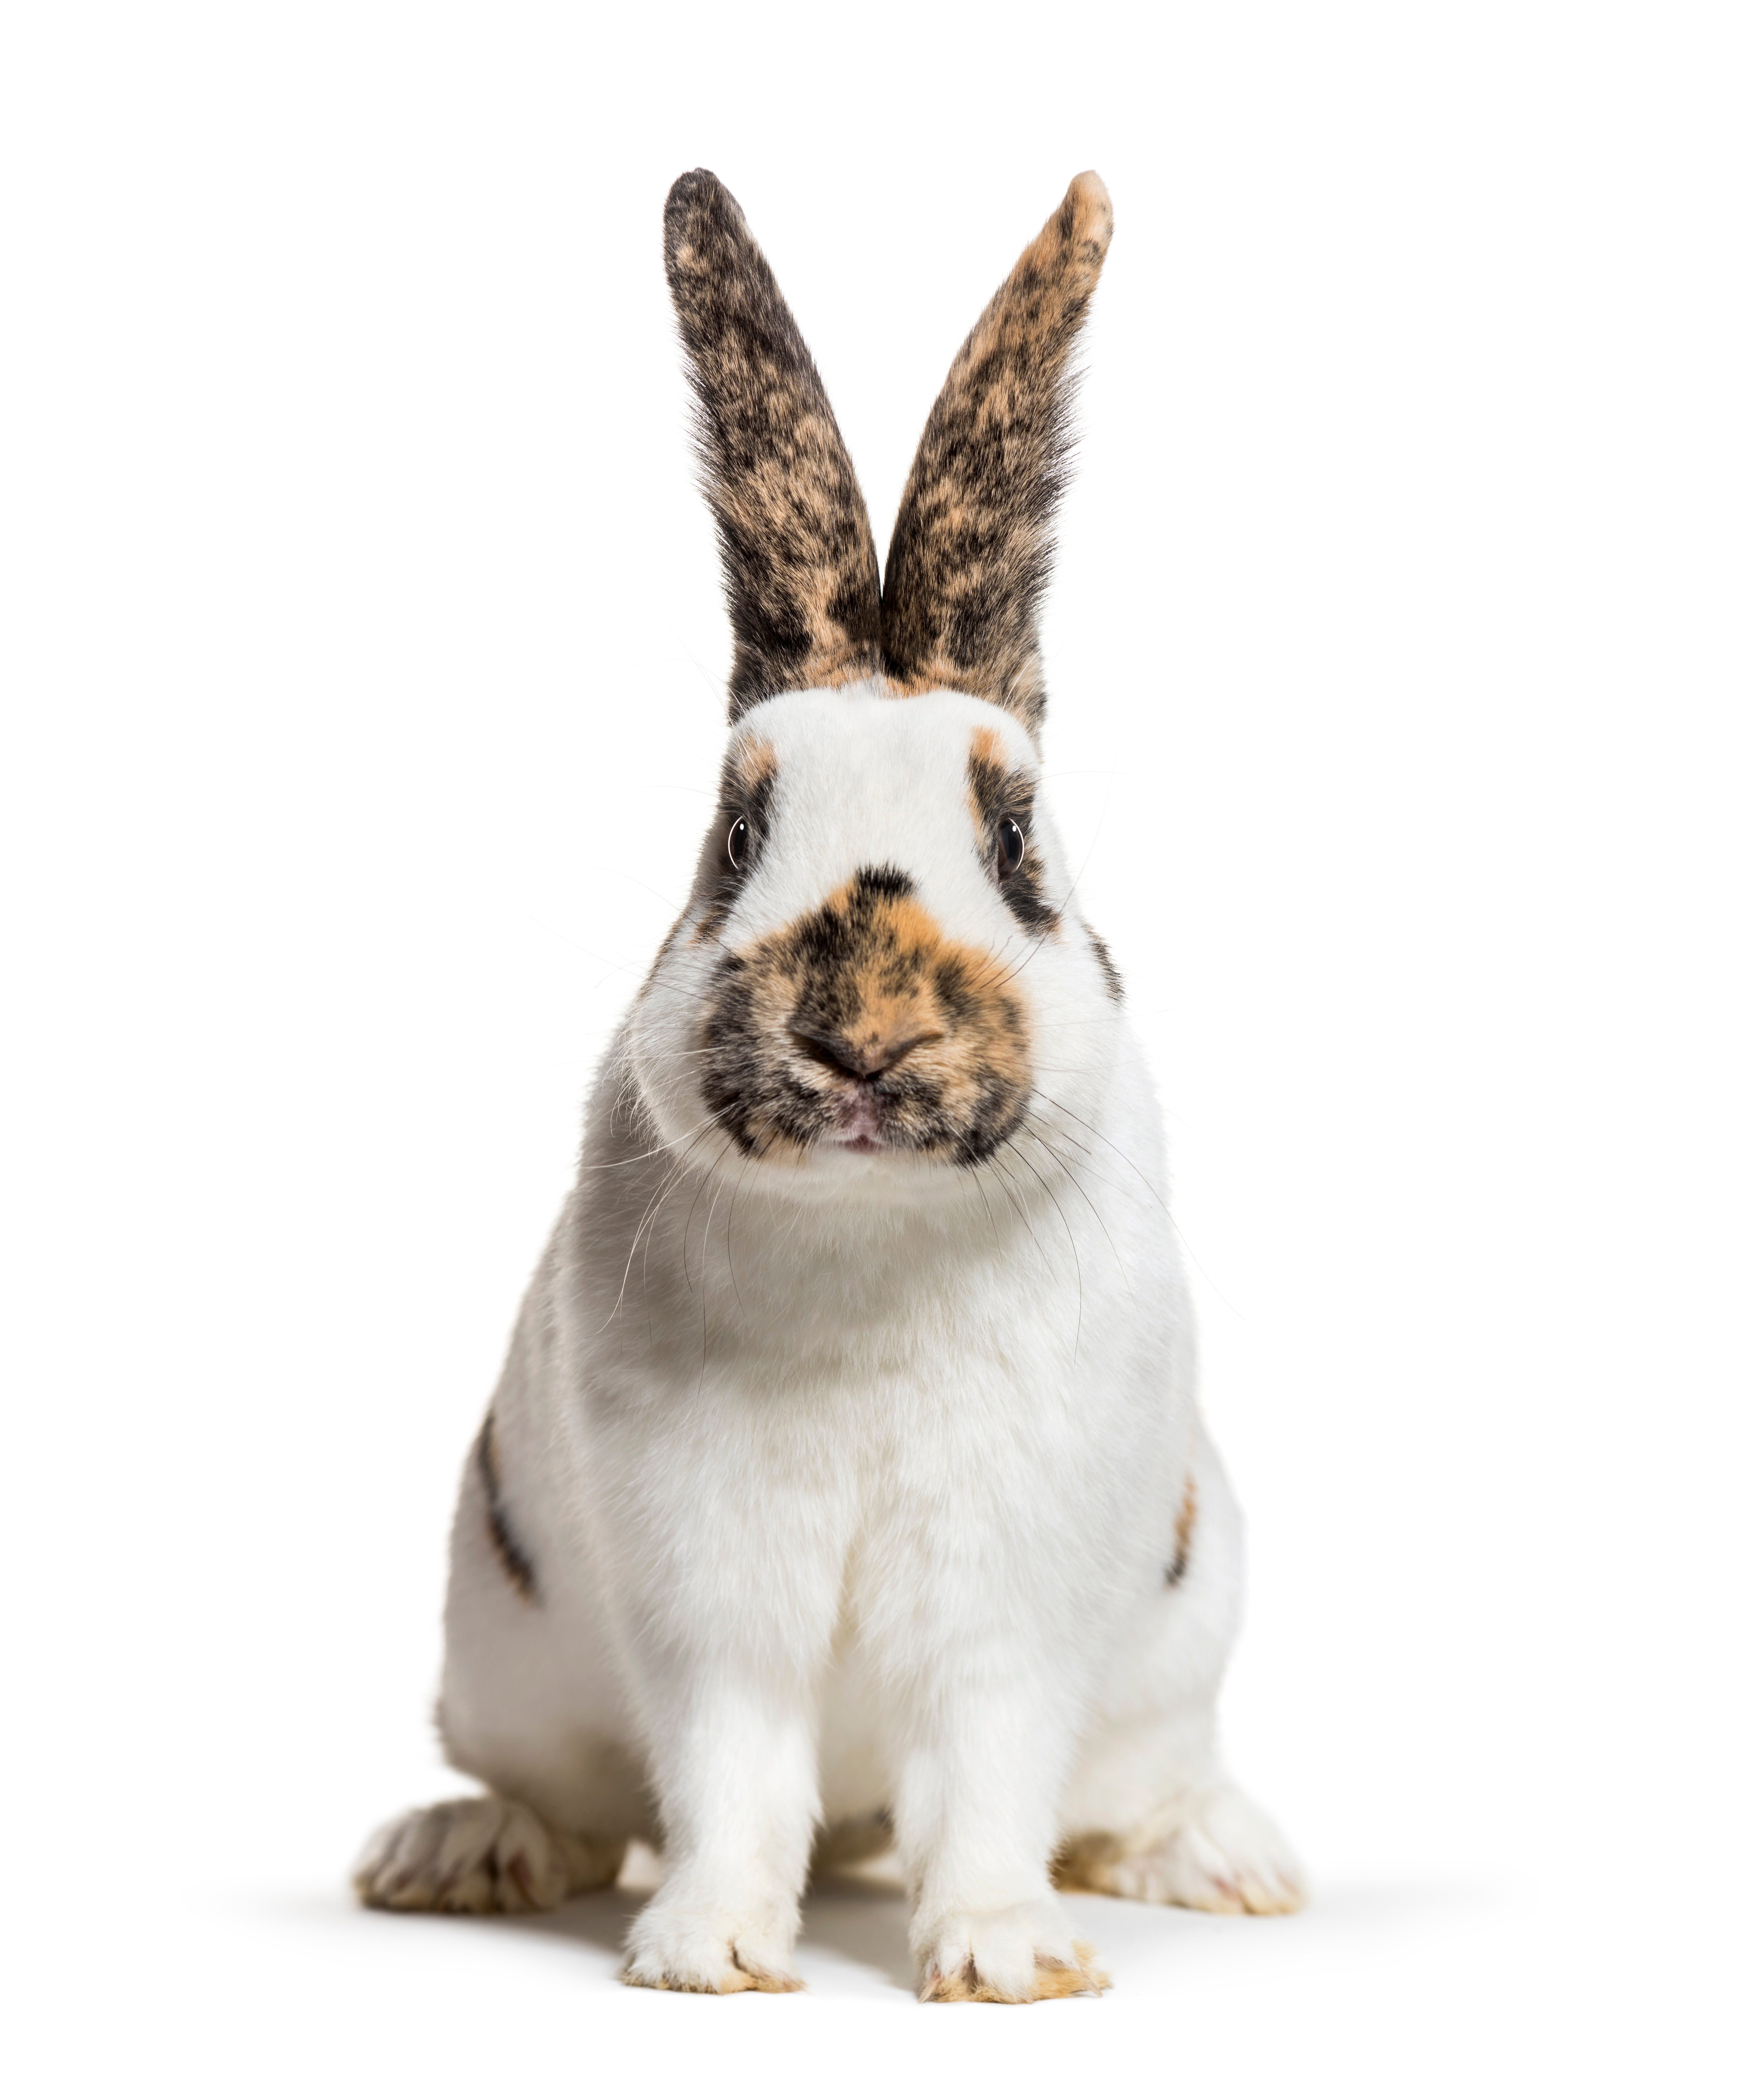 Checkered Giant rabbit is a breed of domestic rabbit that originated in Germany, sitting against white background